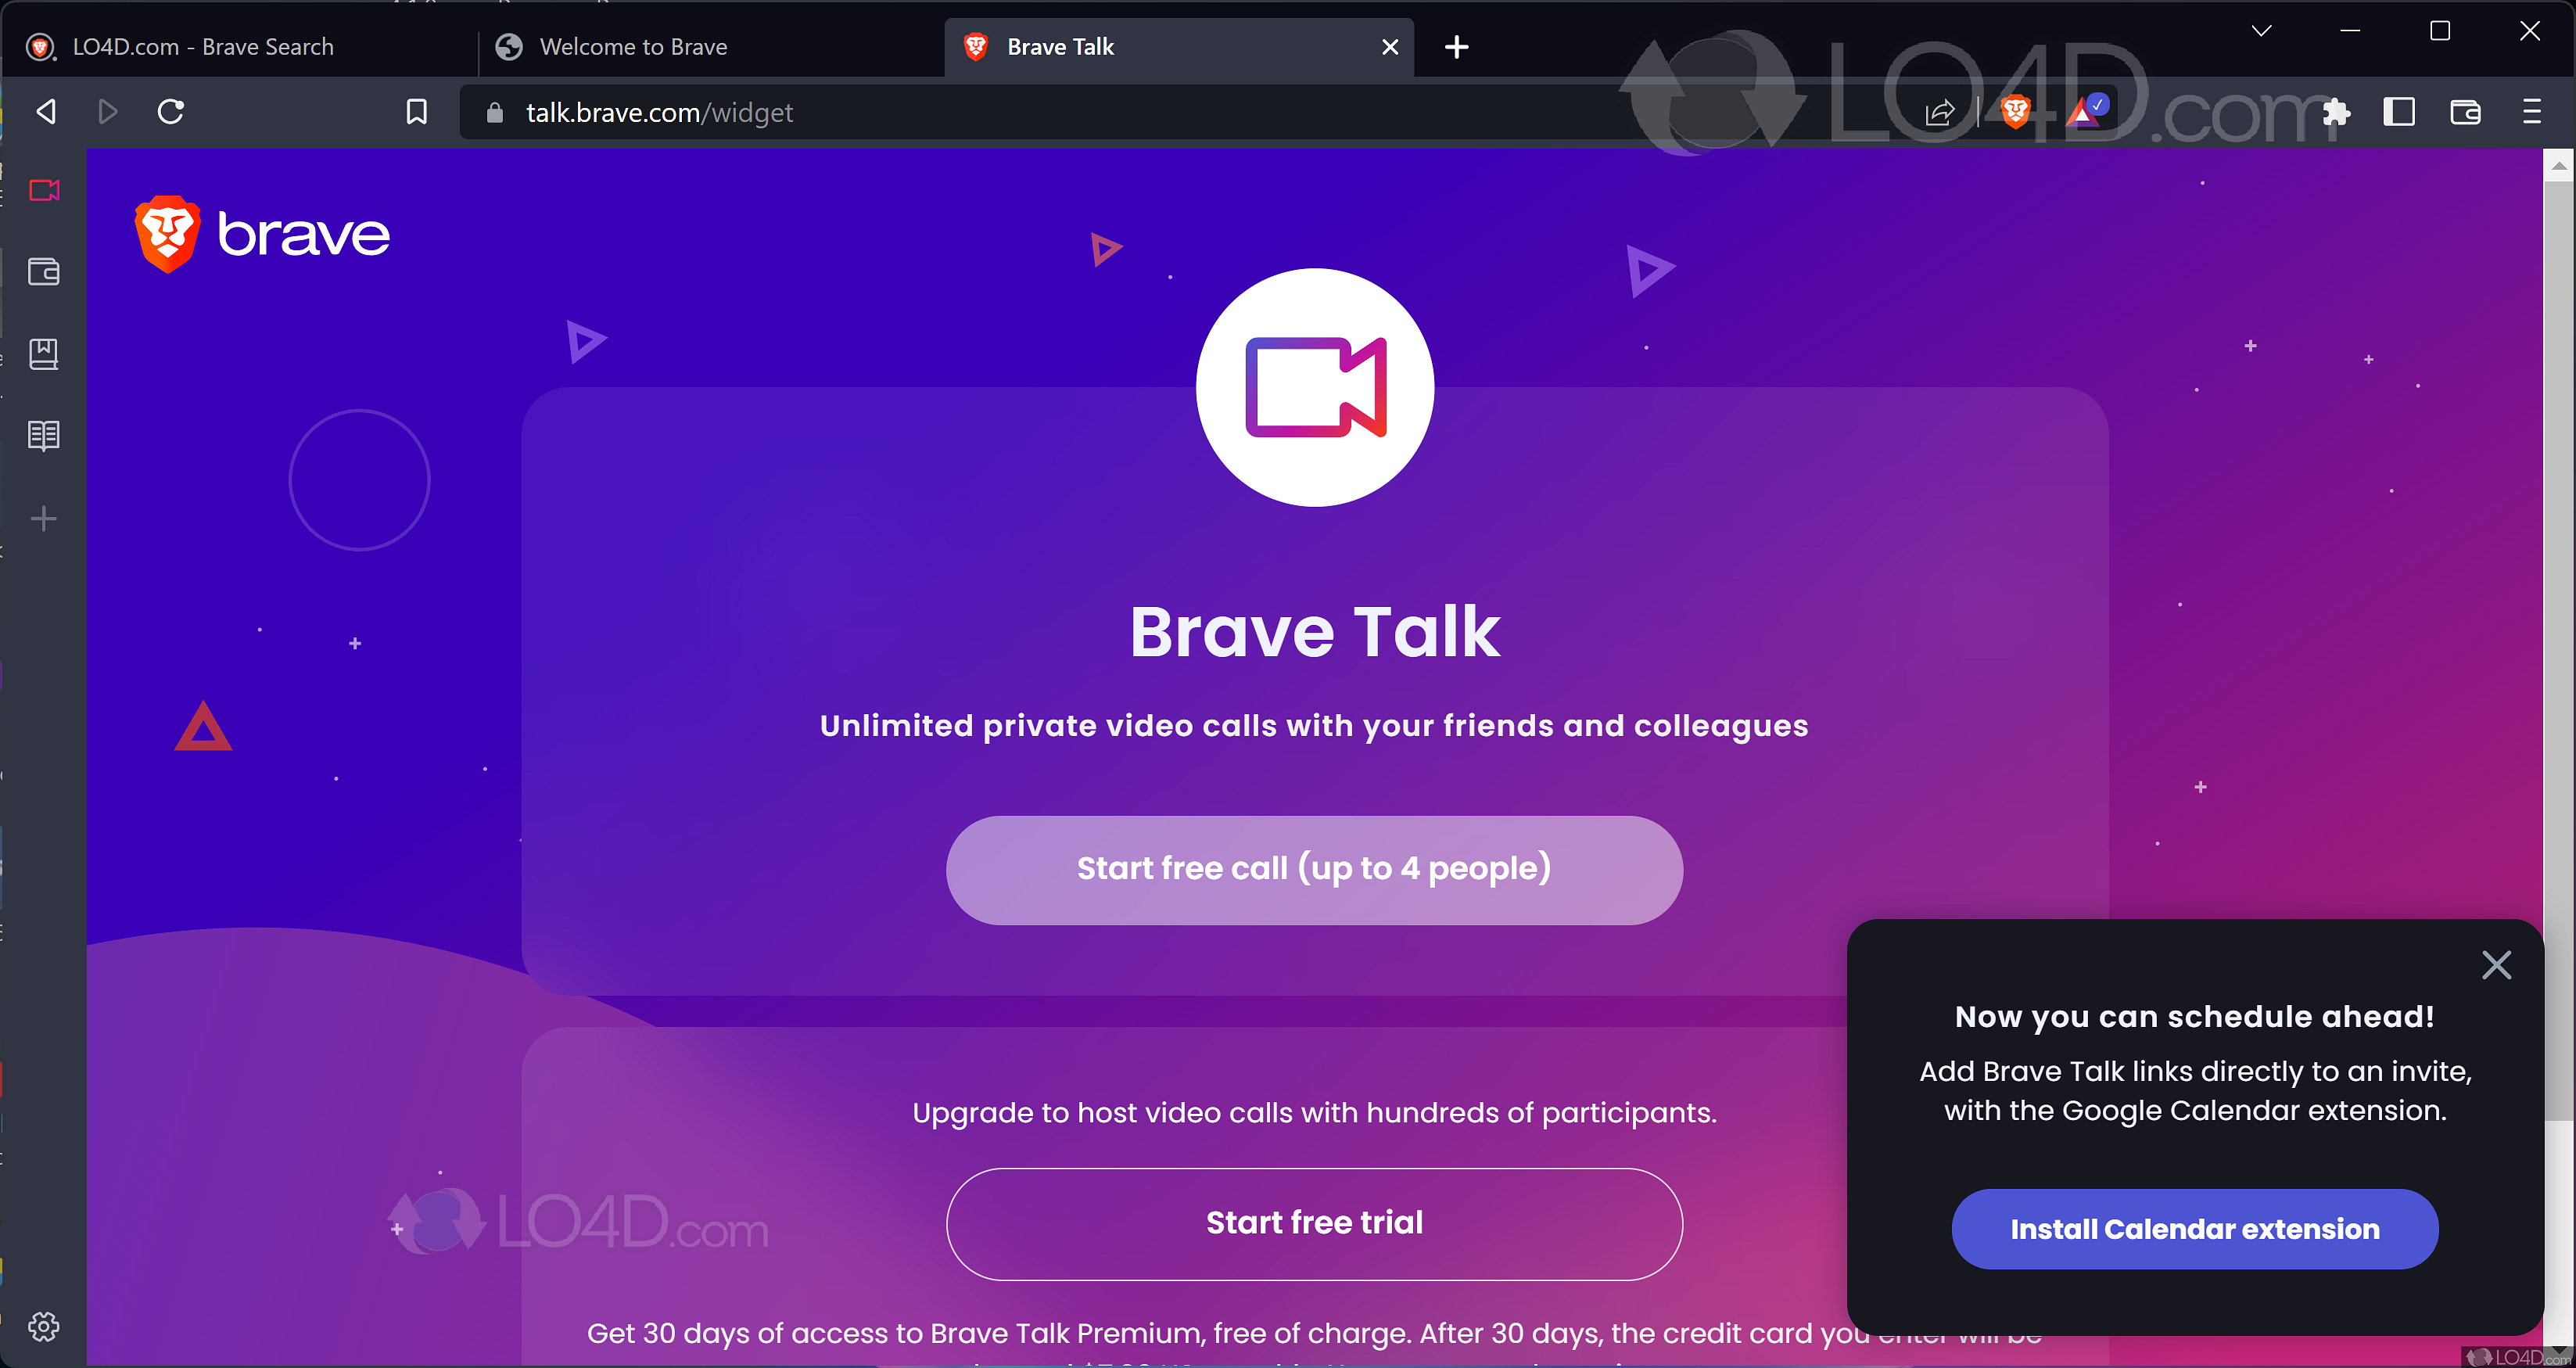 brave 1.52.126 download the last version for android